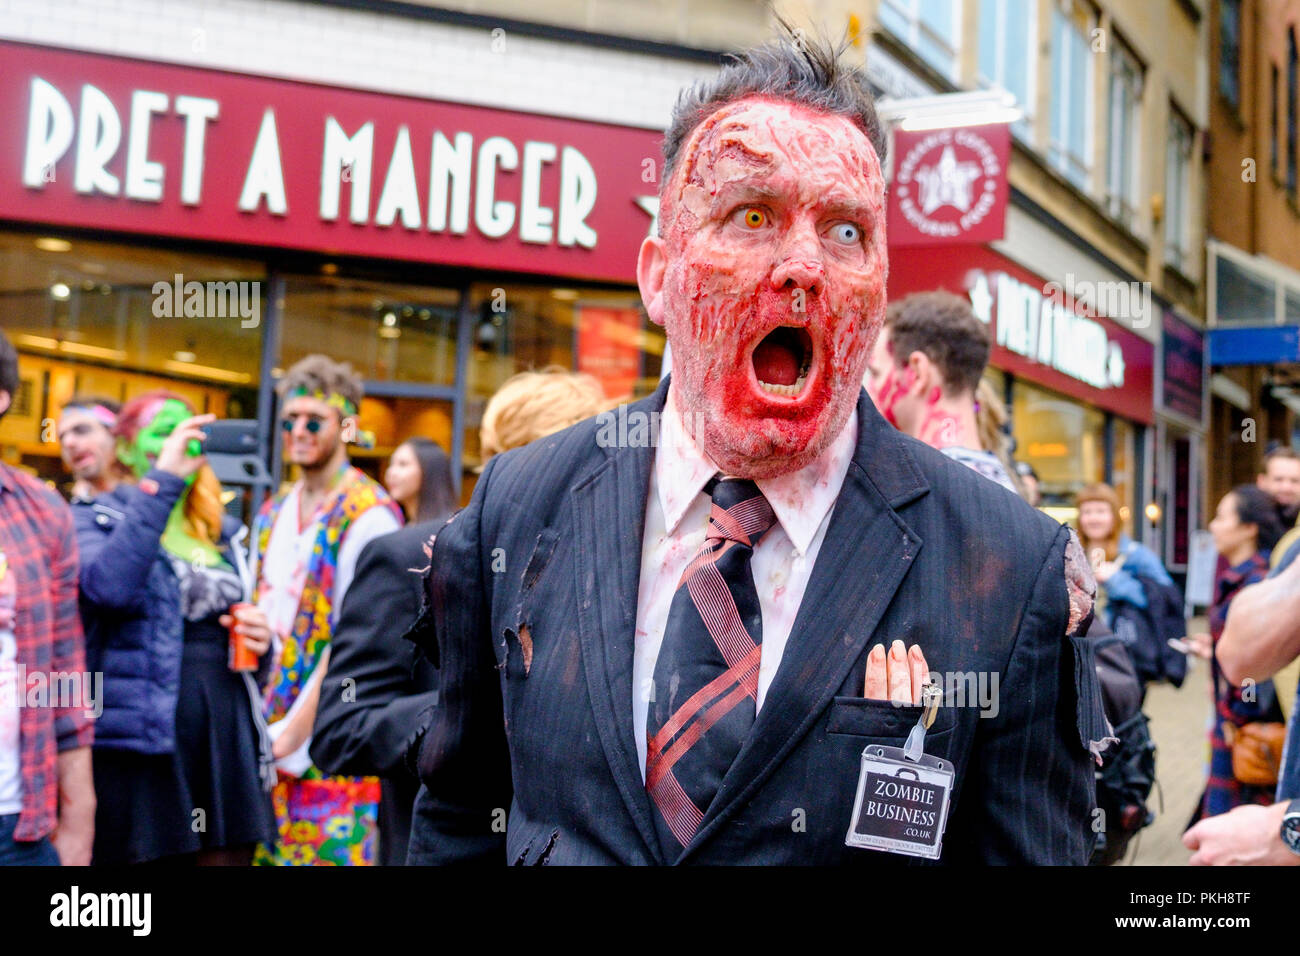 Bristol, UK. 28th Oct, 2017. A man dressed as zombie is pictured as he takes part in a zombie walk through the city centre. Stock Photo